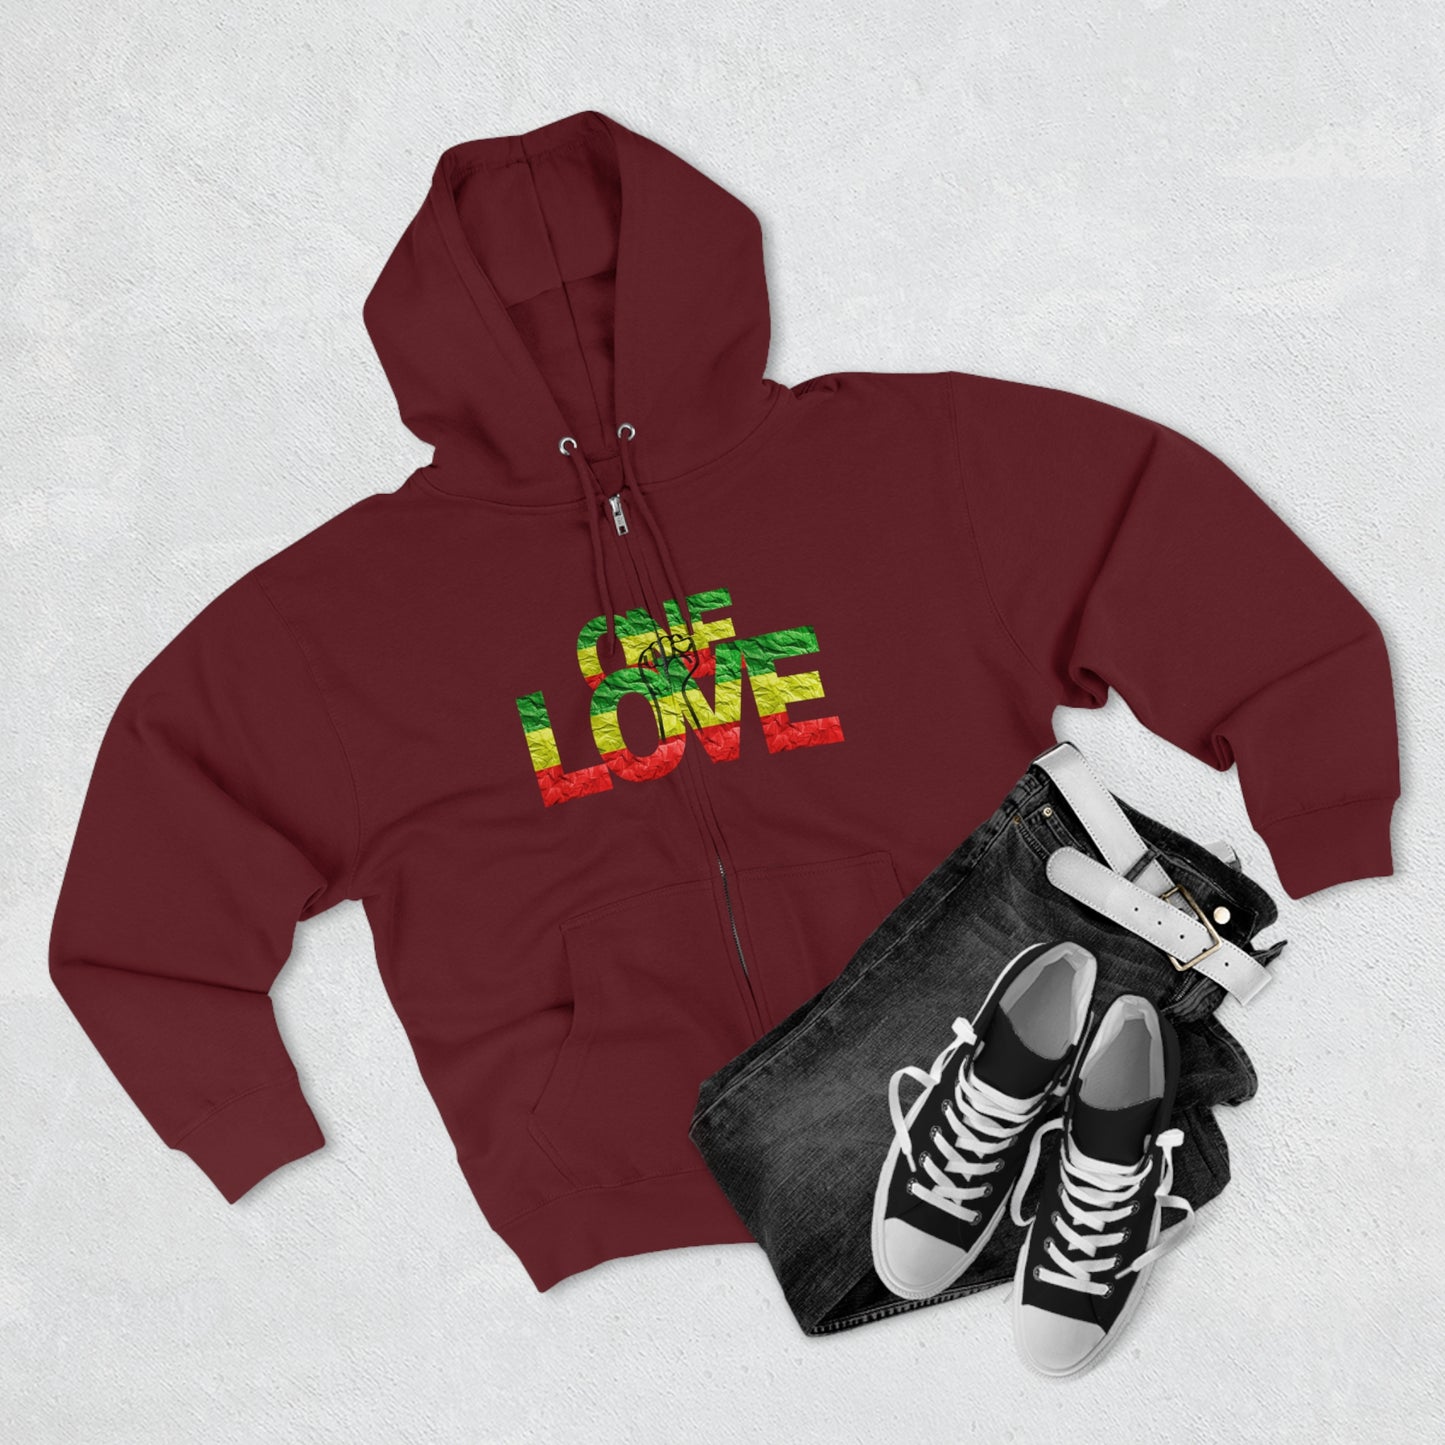 ONE LOVE POWER STATEMENT ZIP FRONT HOODIE GIFT FOR REGGAE LOVERS